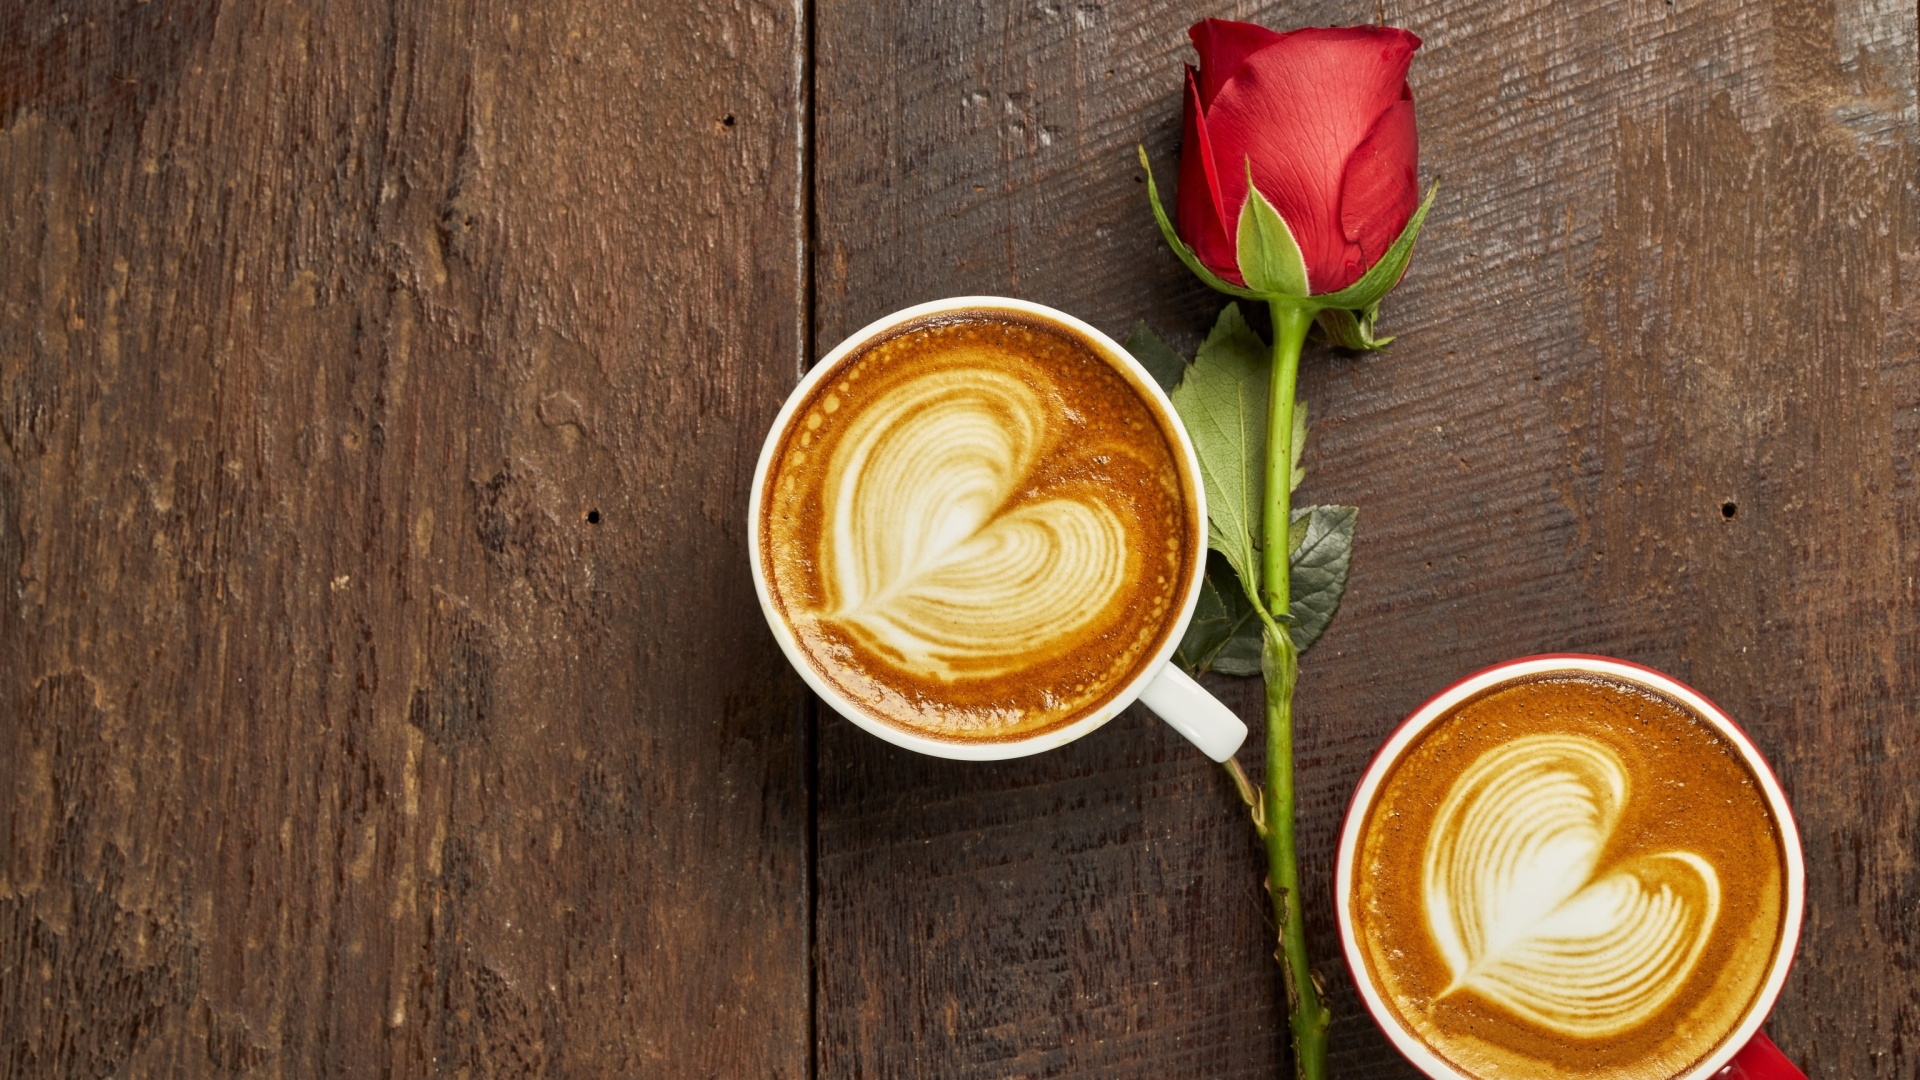 Romantic Coffee and Rose wallpaper 1920x1080